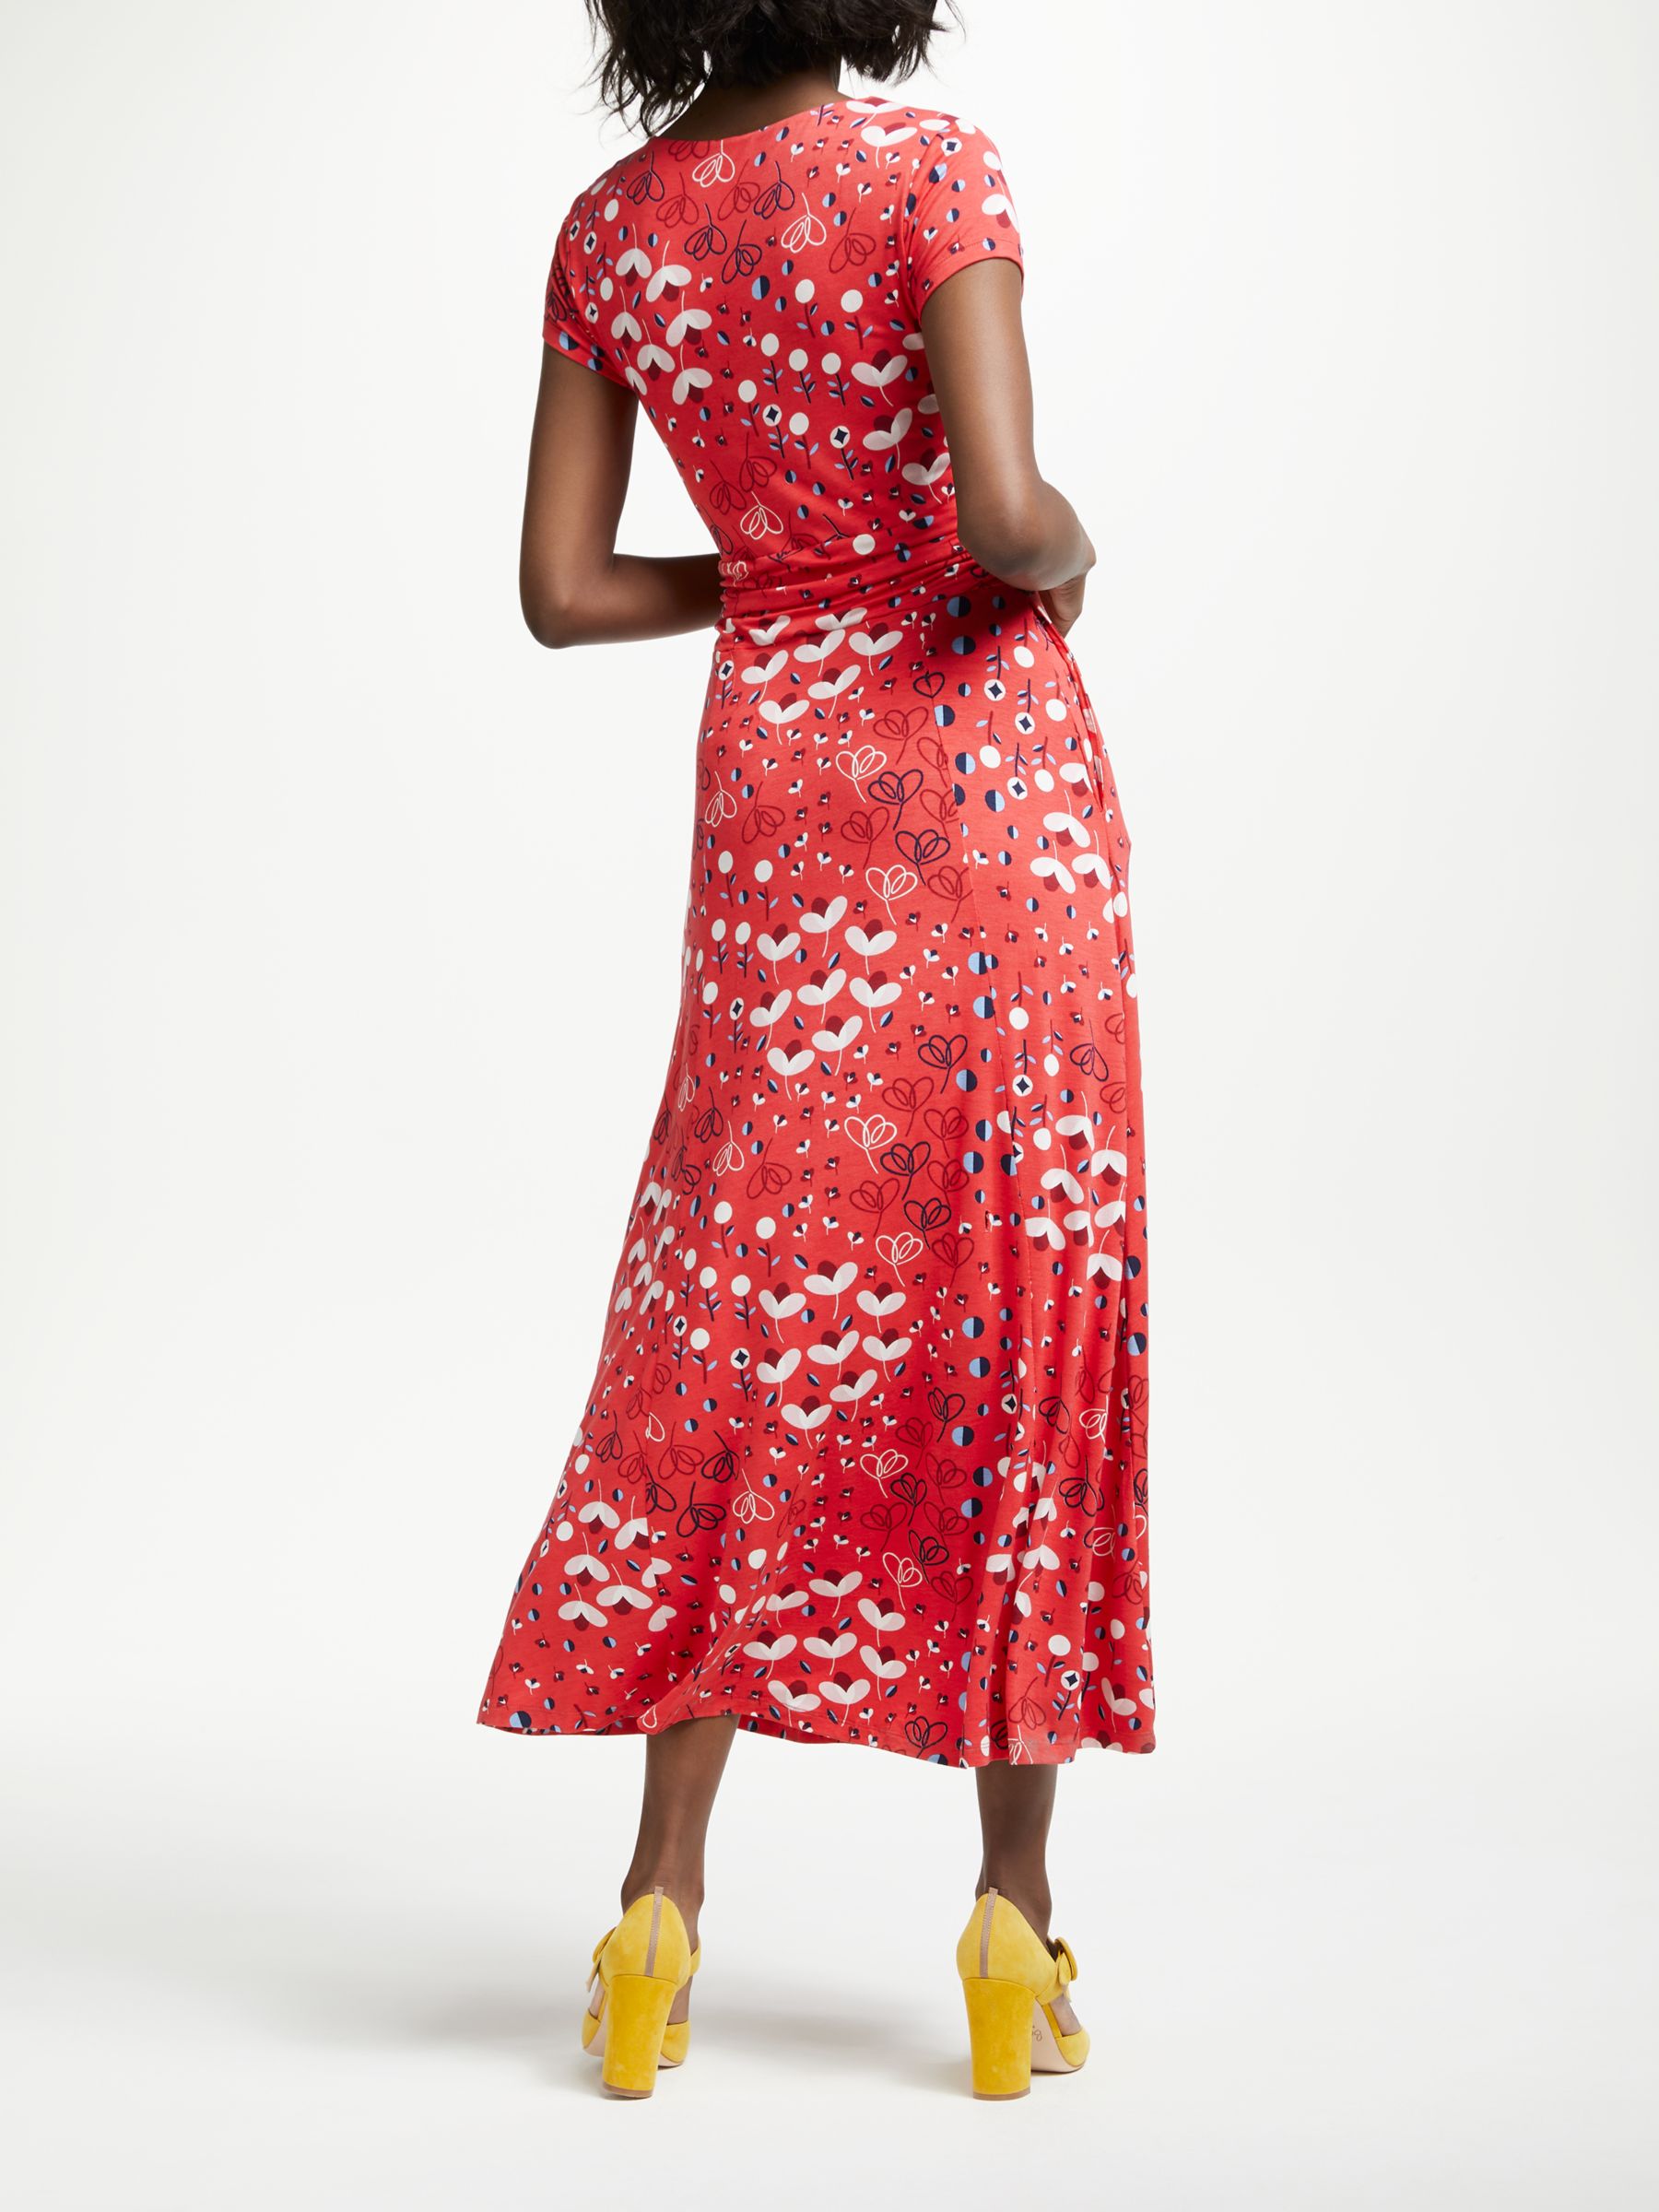 Boden Lily Jersey Dress at John Lewis 